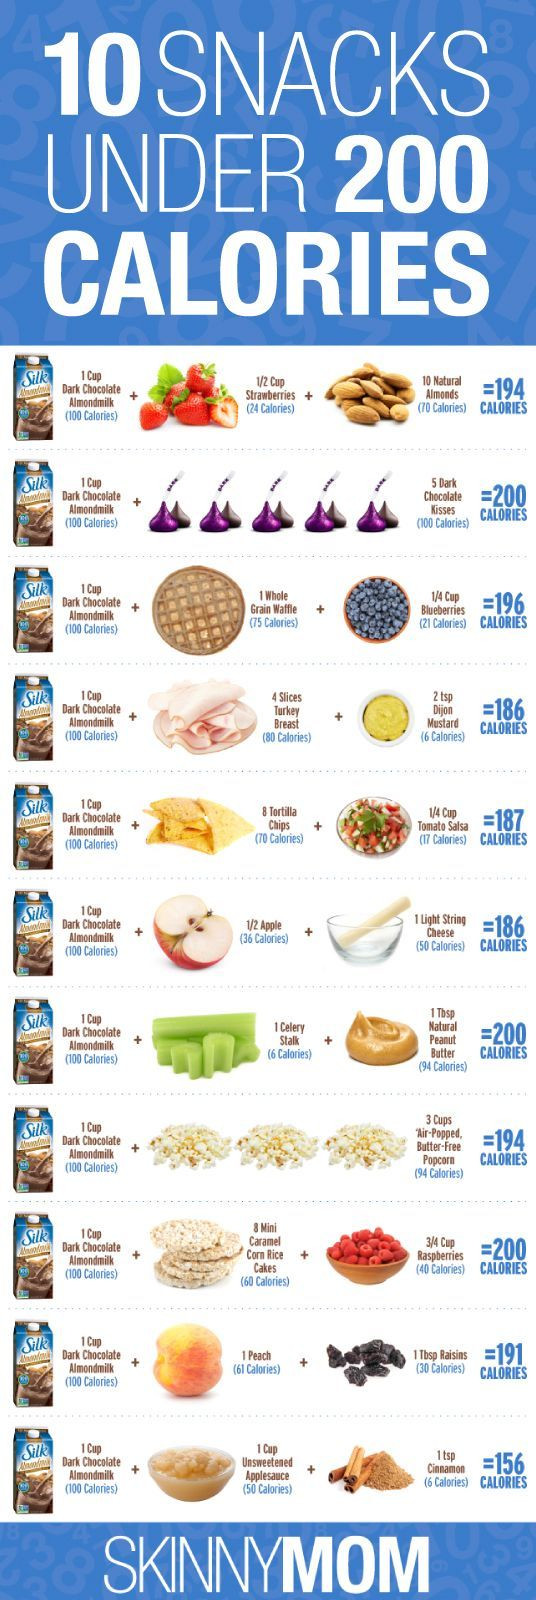 Healthy Snacks Under 200 Calories
 10 Snacks Under 200 Calories s and